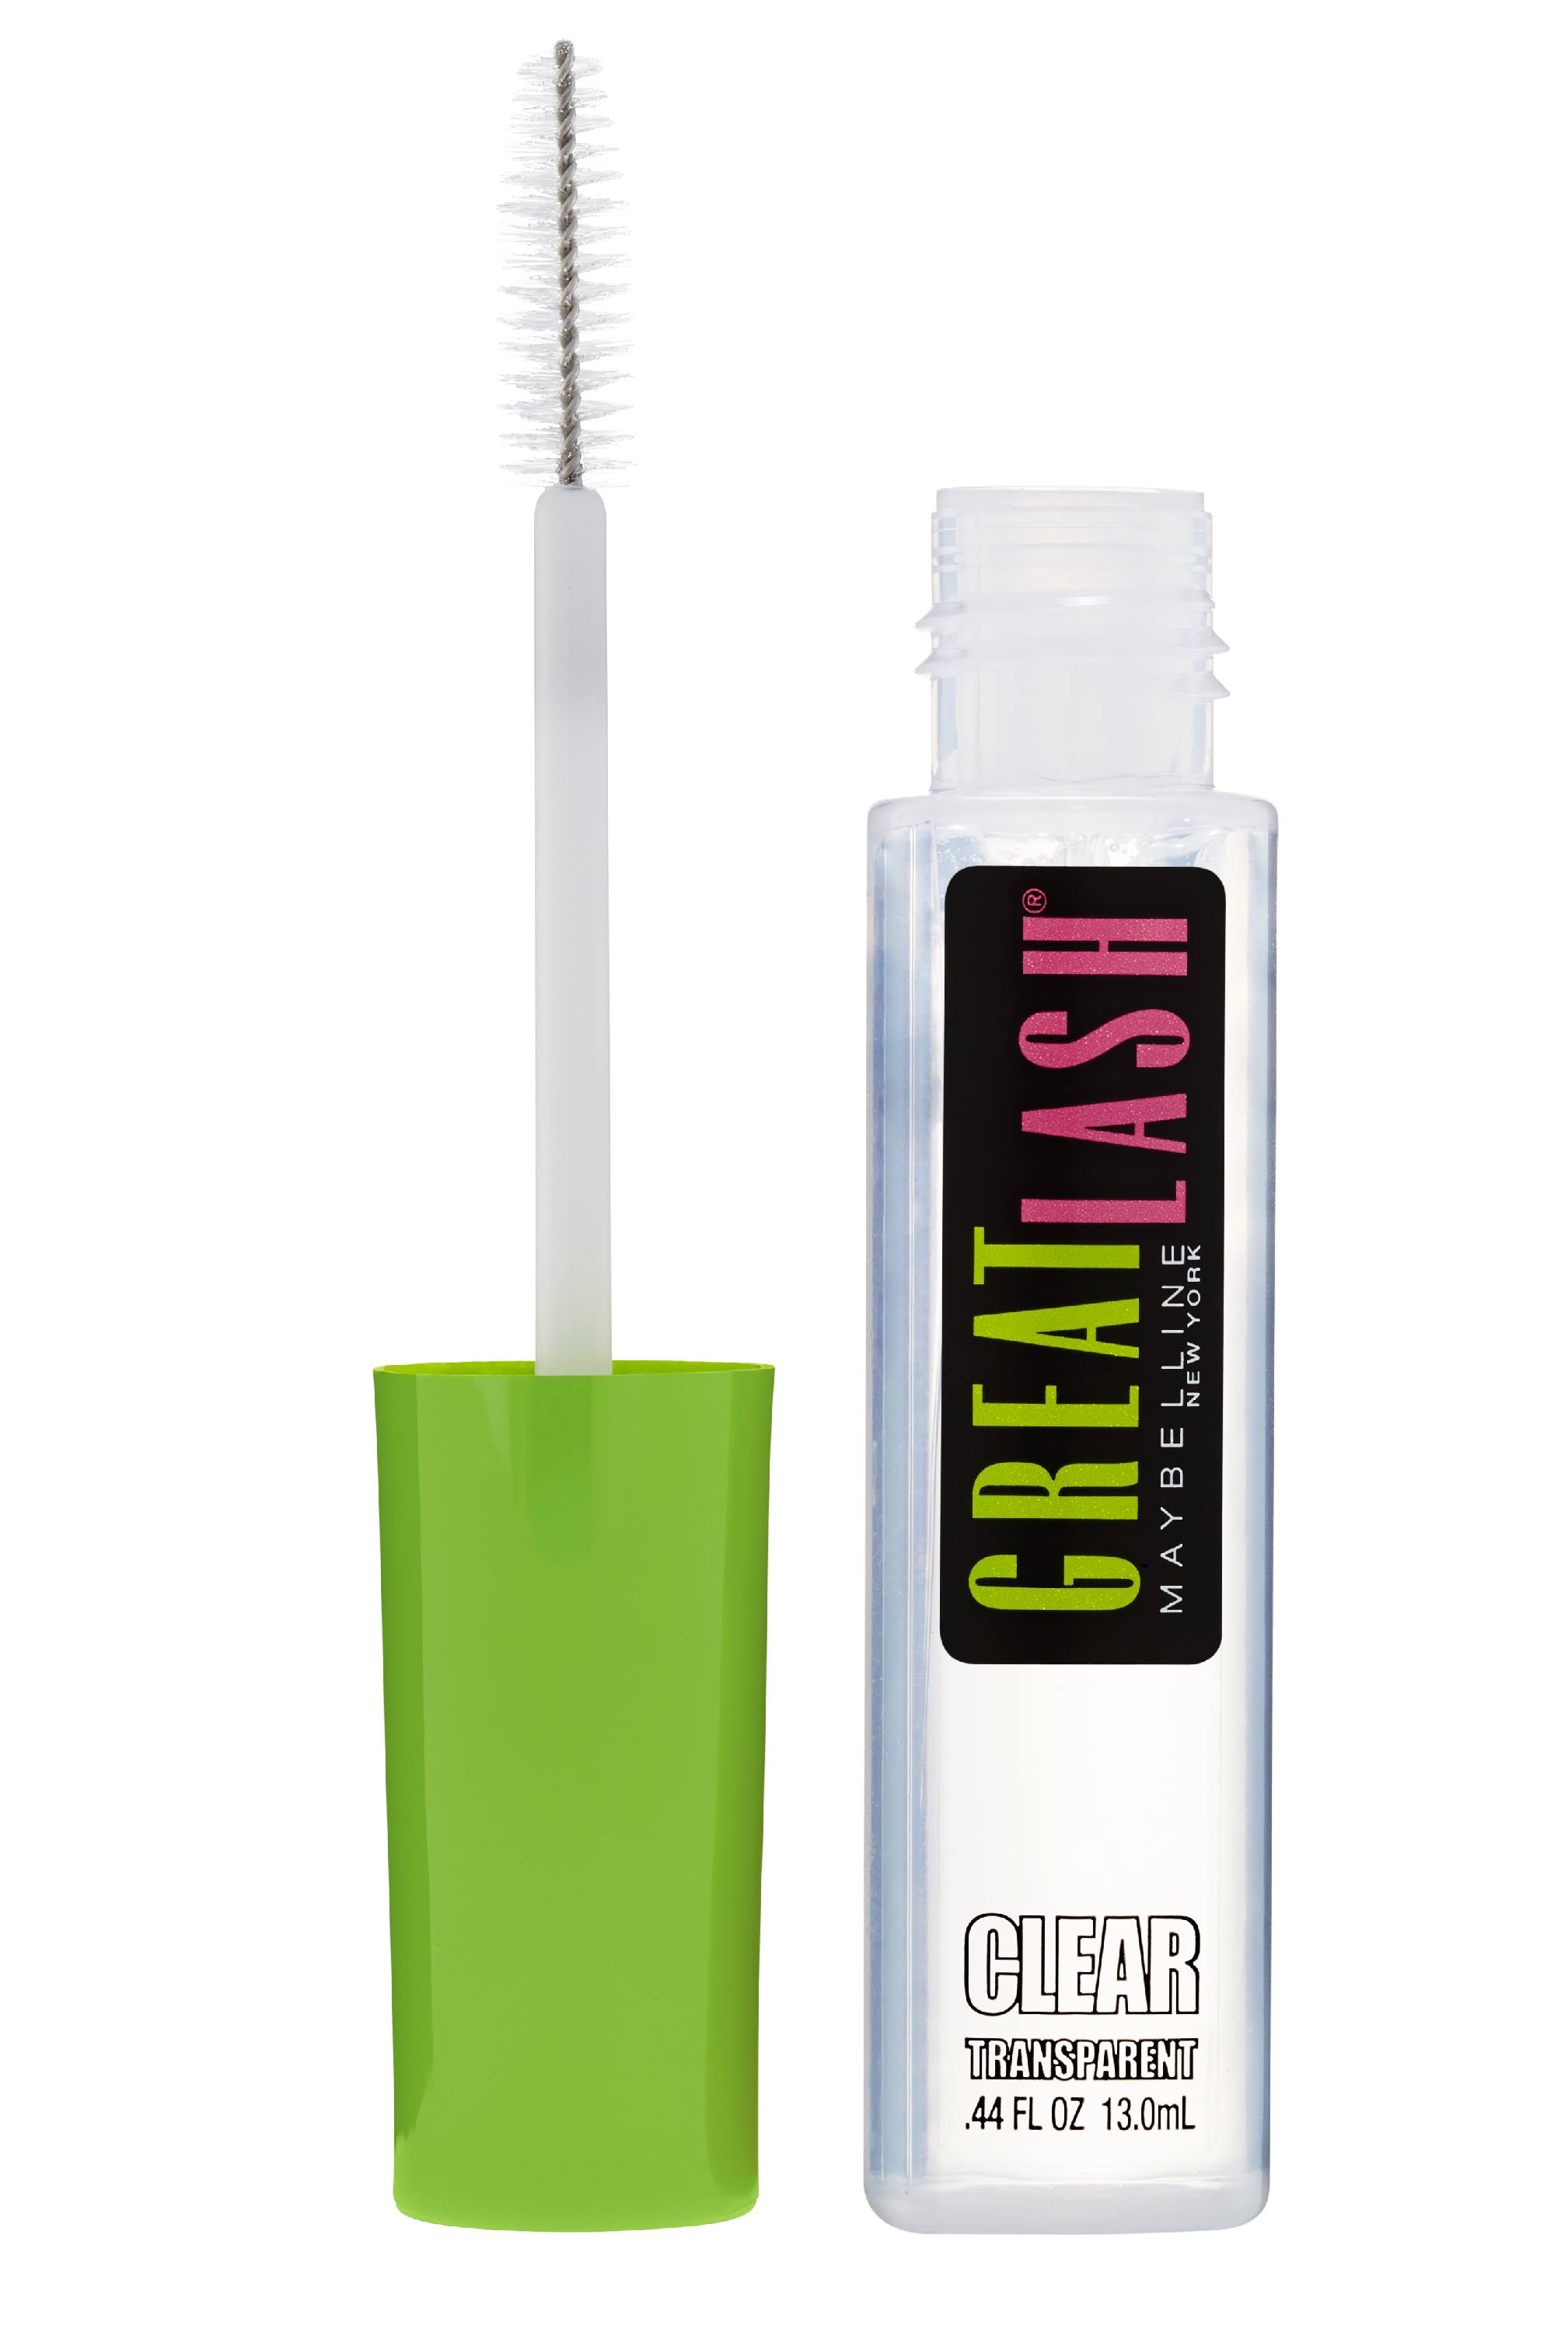 Maybelline Great Transparent Mascara - 110 Clear